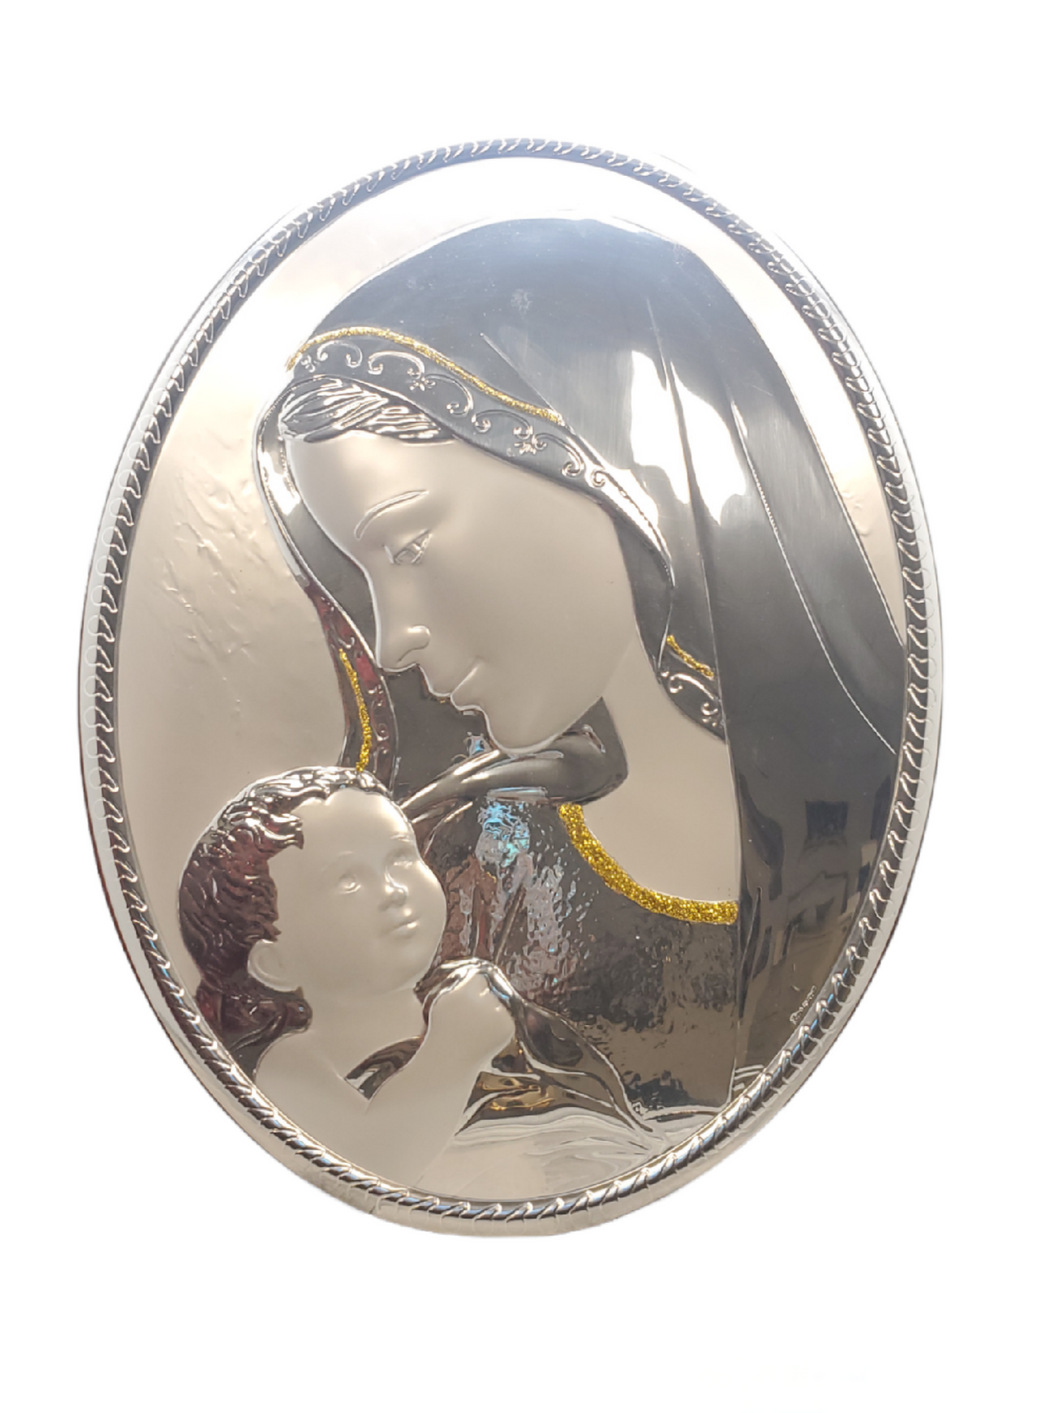 Mother and Child Gold Accents W/  Italian 925 Argento Silver  Plaque  13 x 18 #1996-O